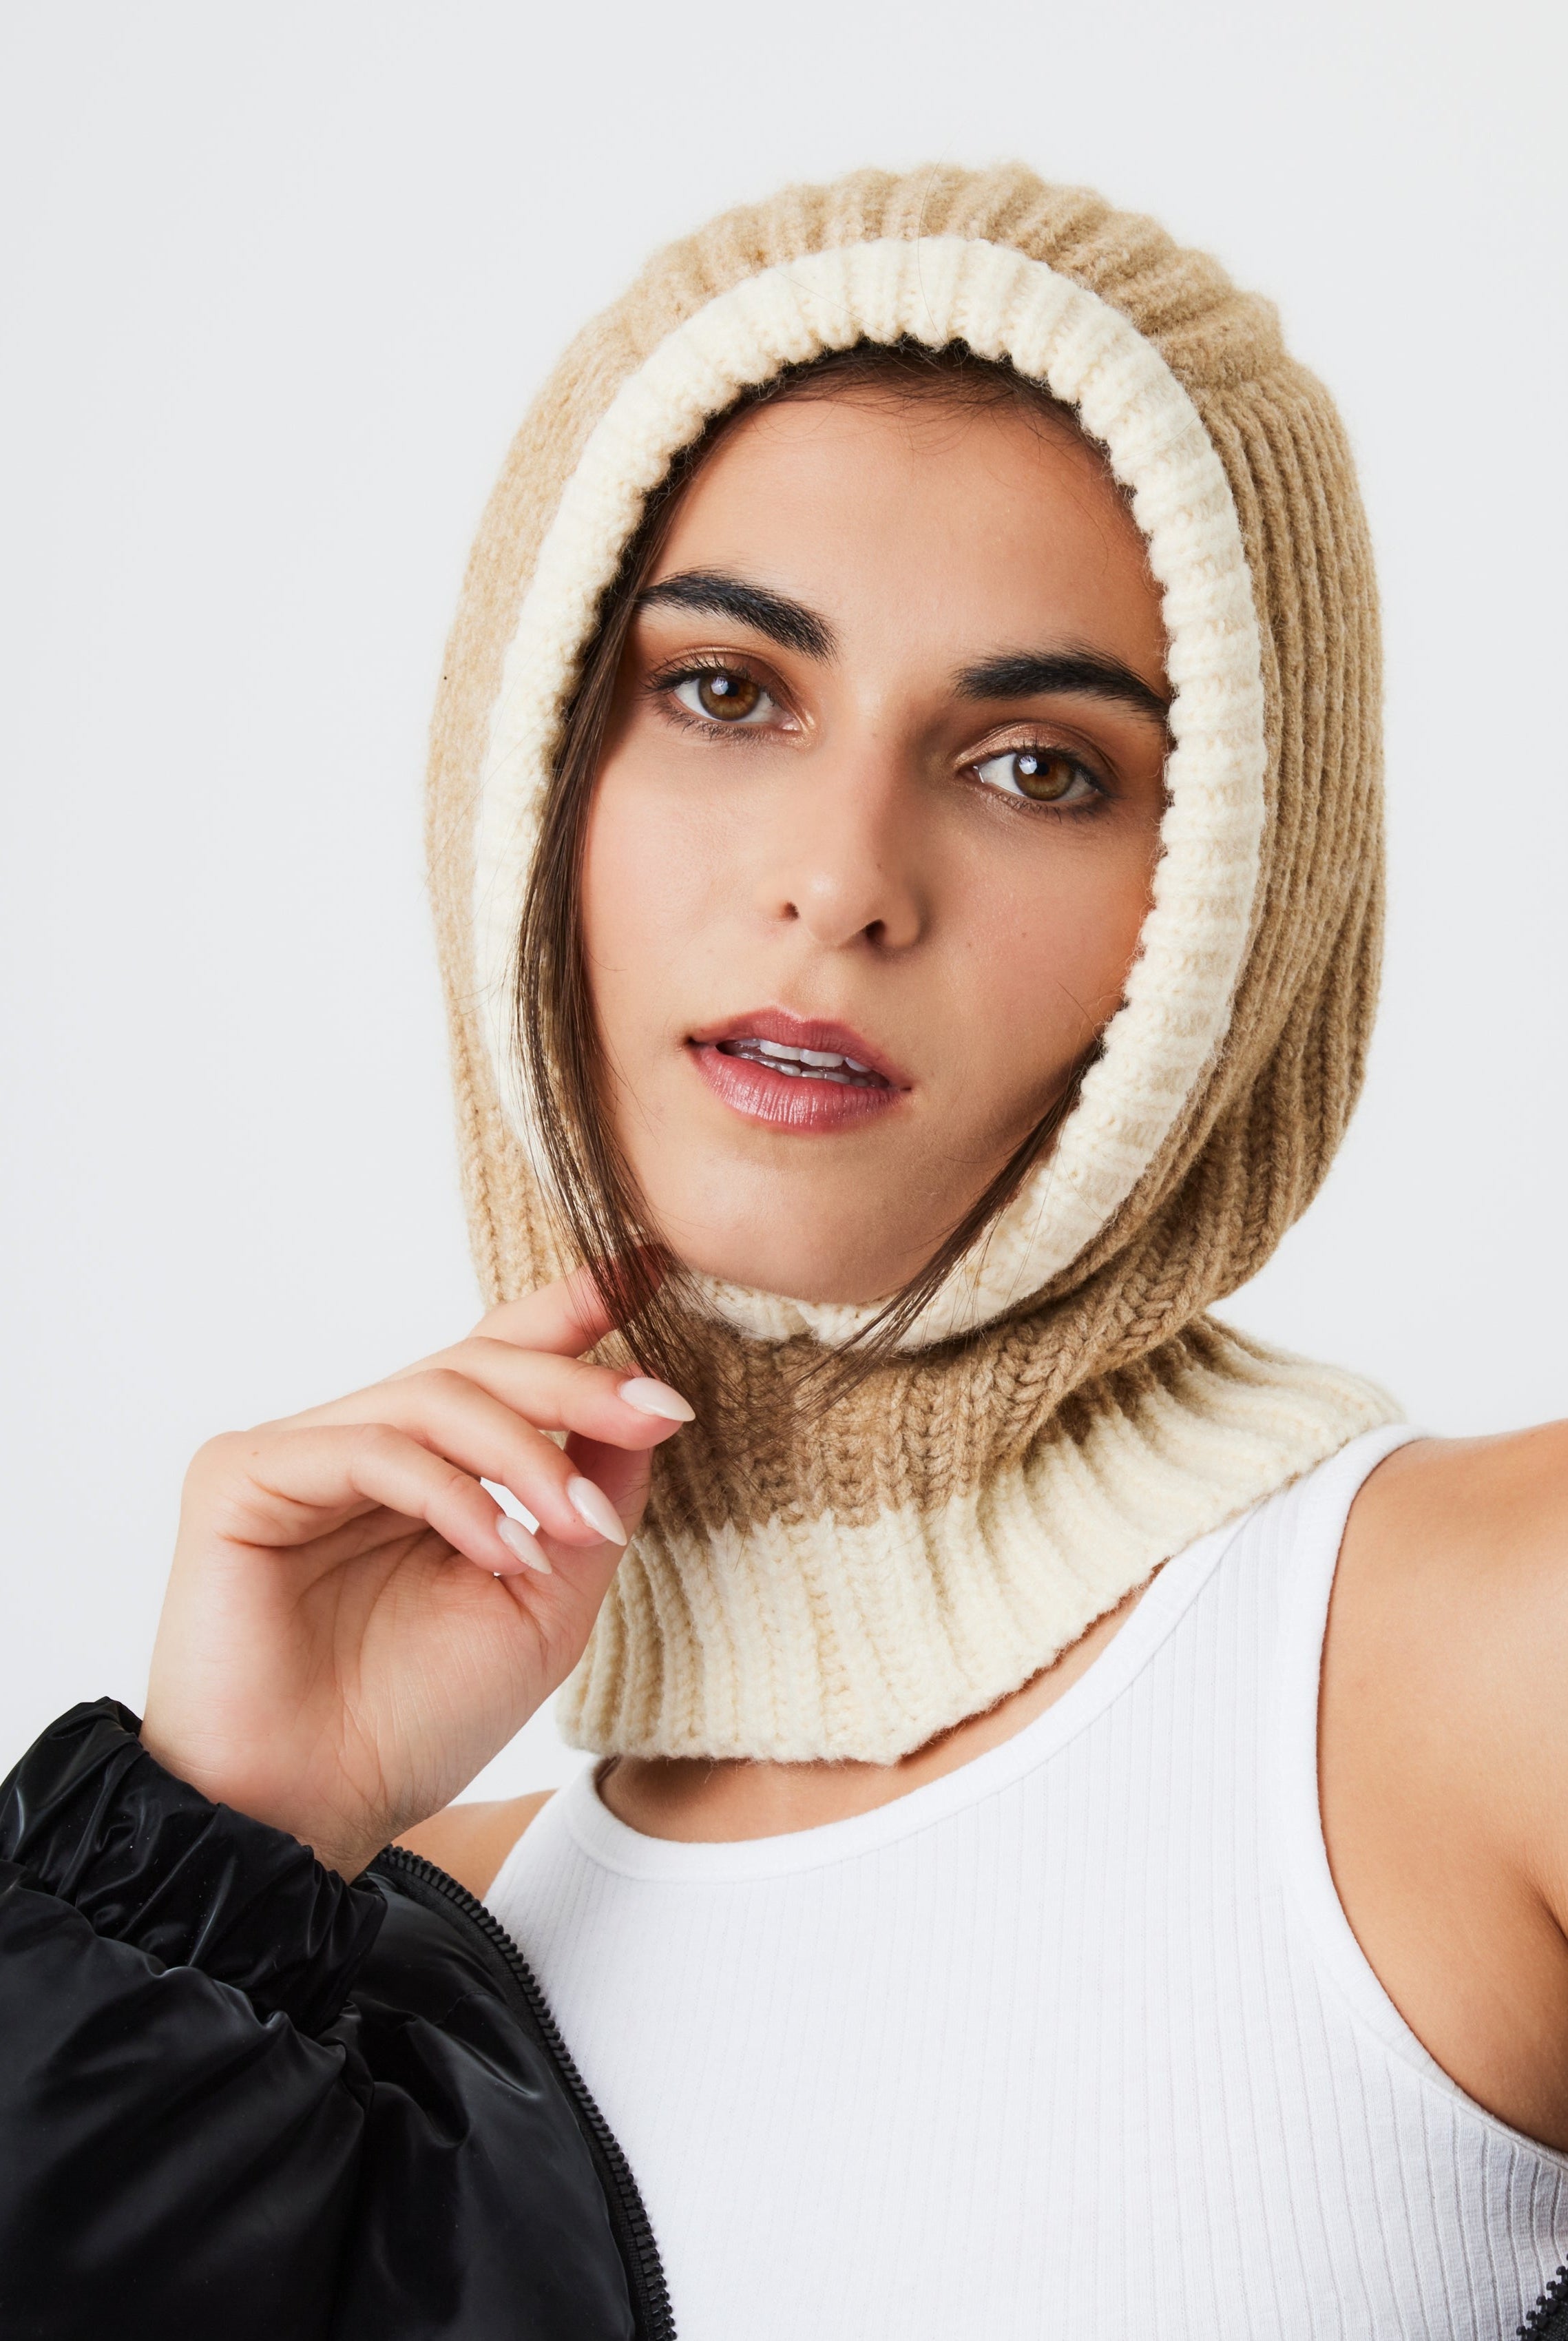 Loose Fit Ribbed Knit Balaclava in Beige | knitted | knitwear | ski | Skiing | Winter | Autumn | Plaza core | Winter Accessories | Autumn Accessories |  